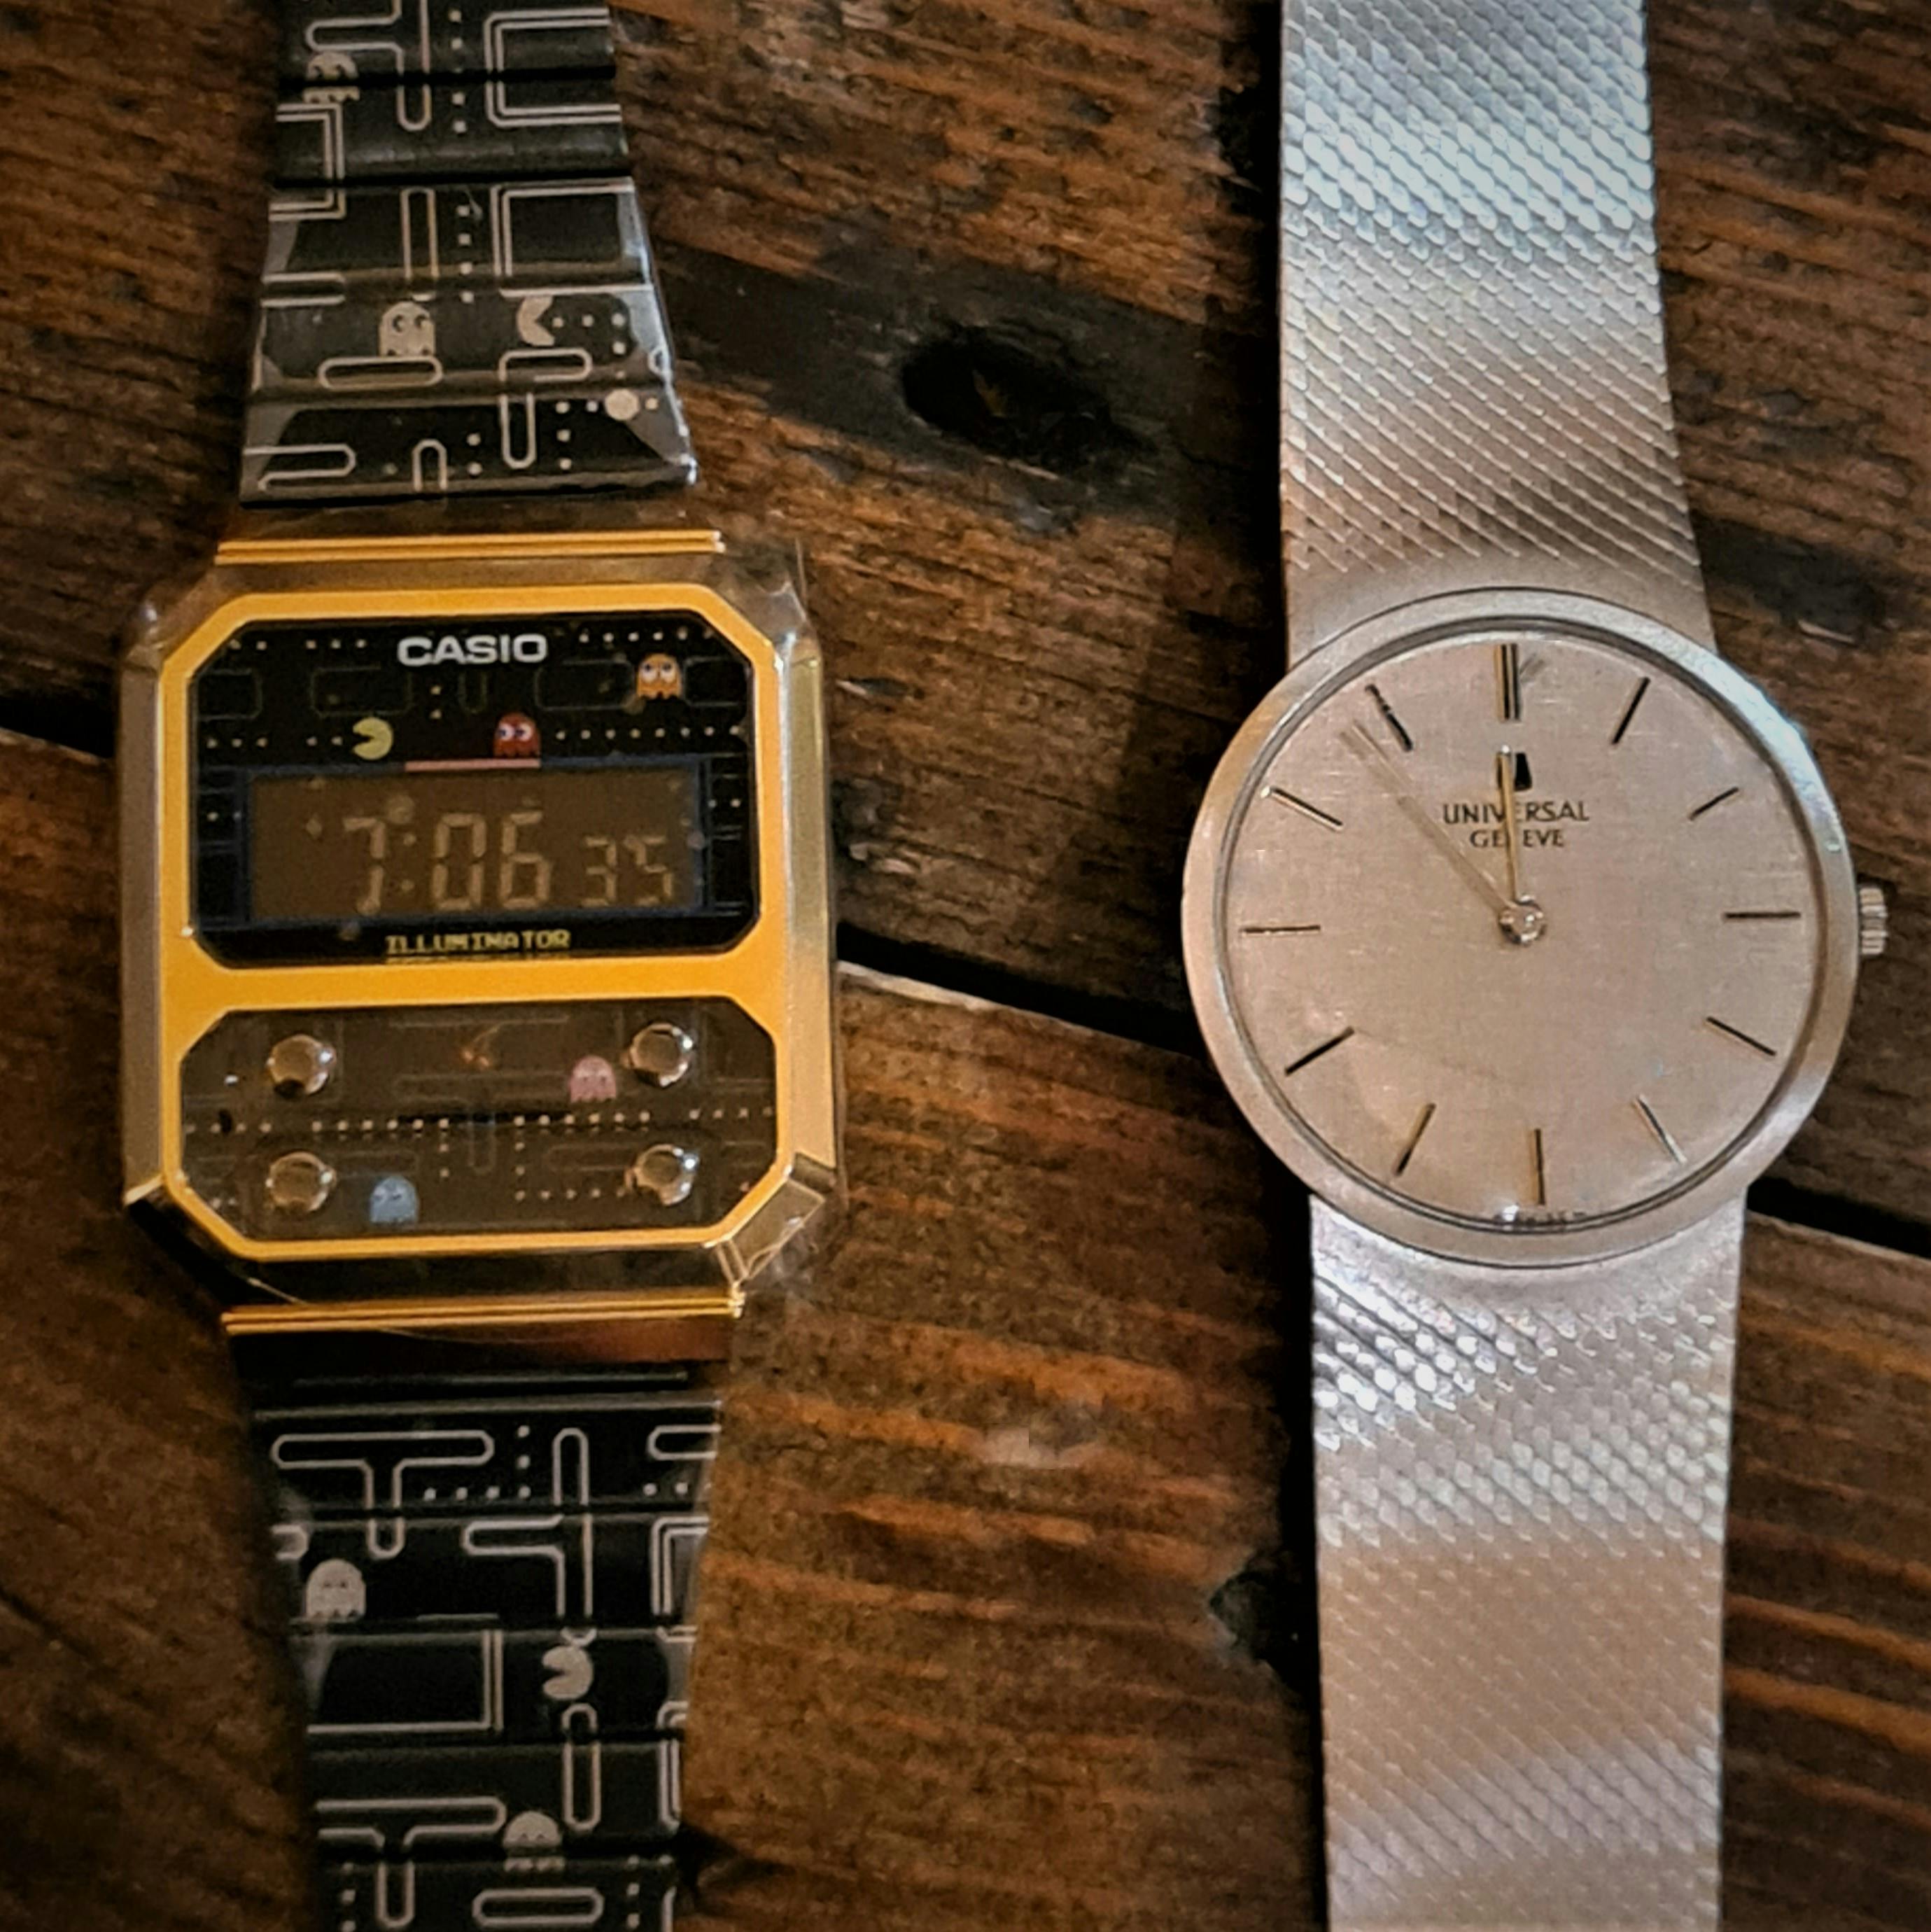 Two spectacularly different watches at our October In-Person Watch Meetup; a Casio Pacman and a Universale Geneve Dress watch.